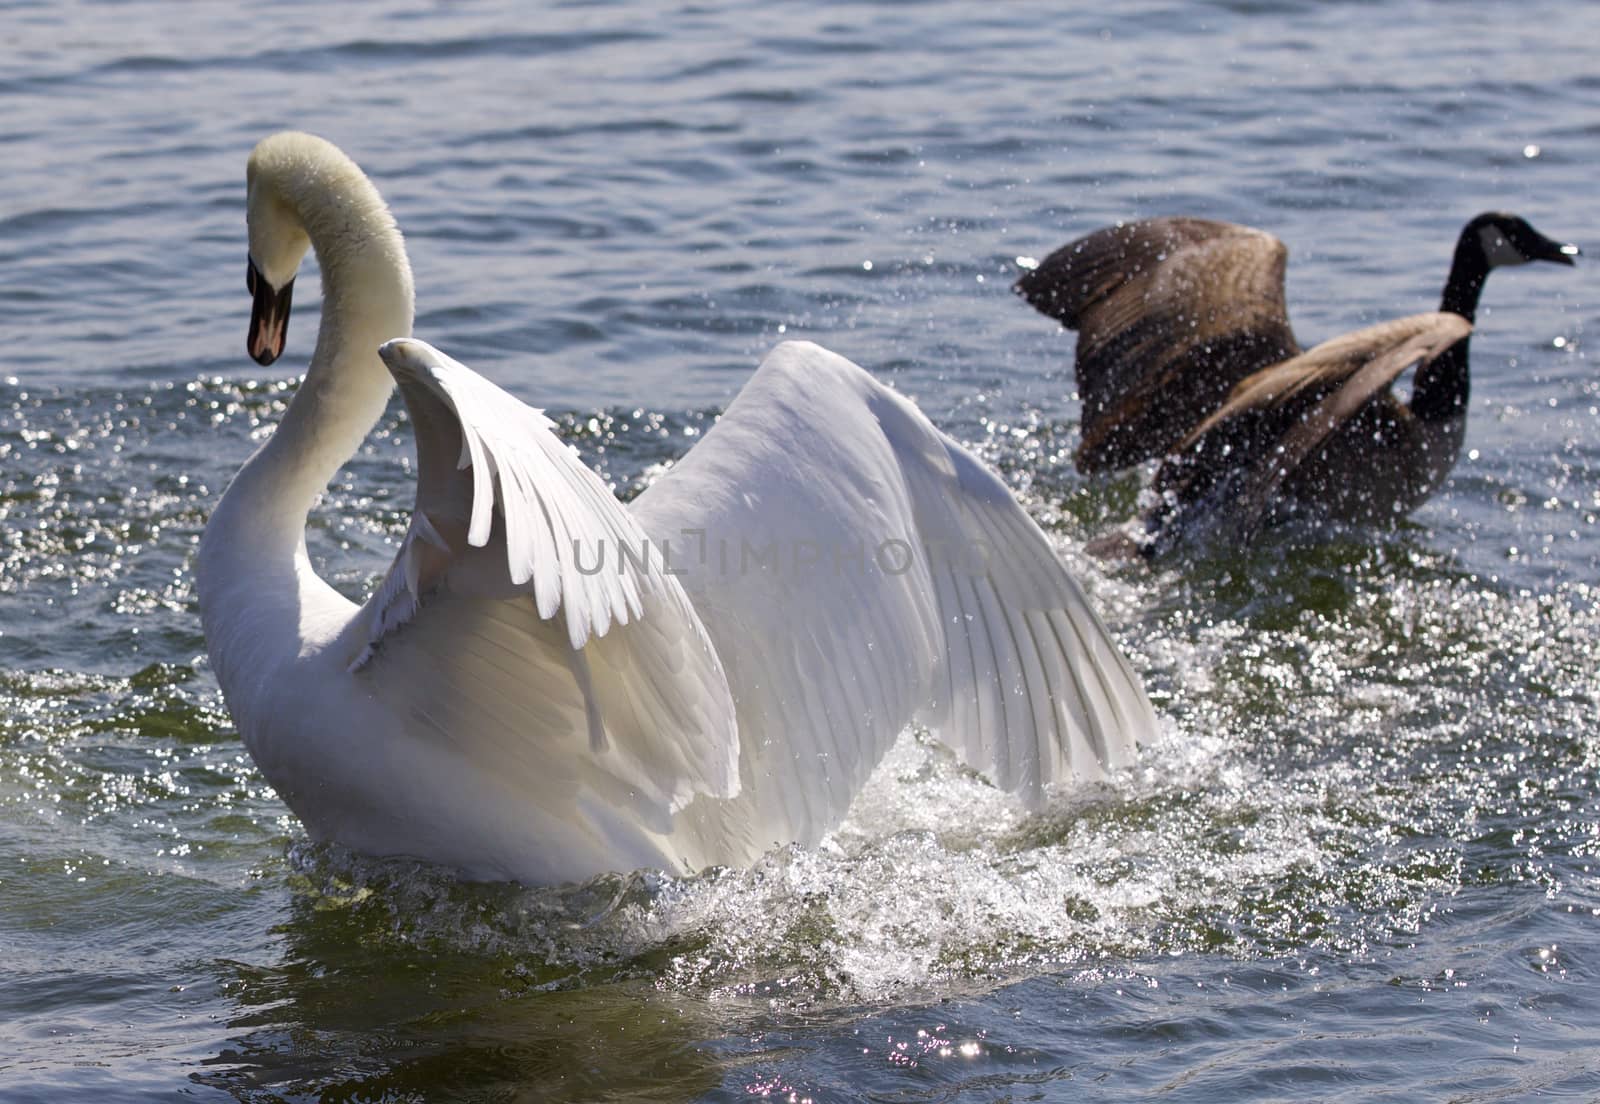 Amazing photo of the fantastic contest between the powerful swan and the brave Canada goose by teo